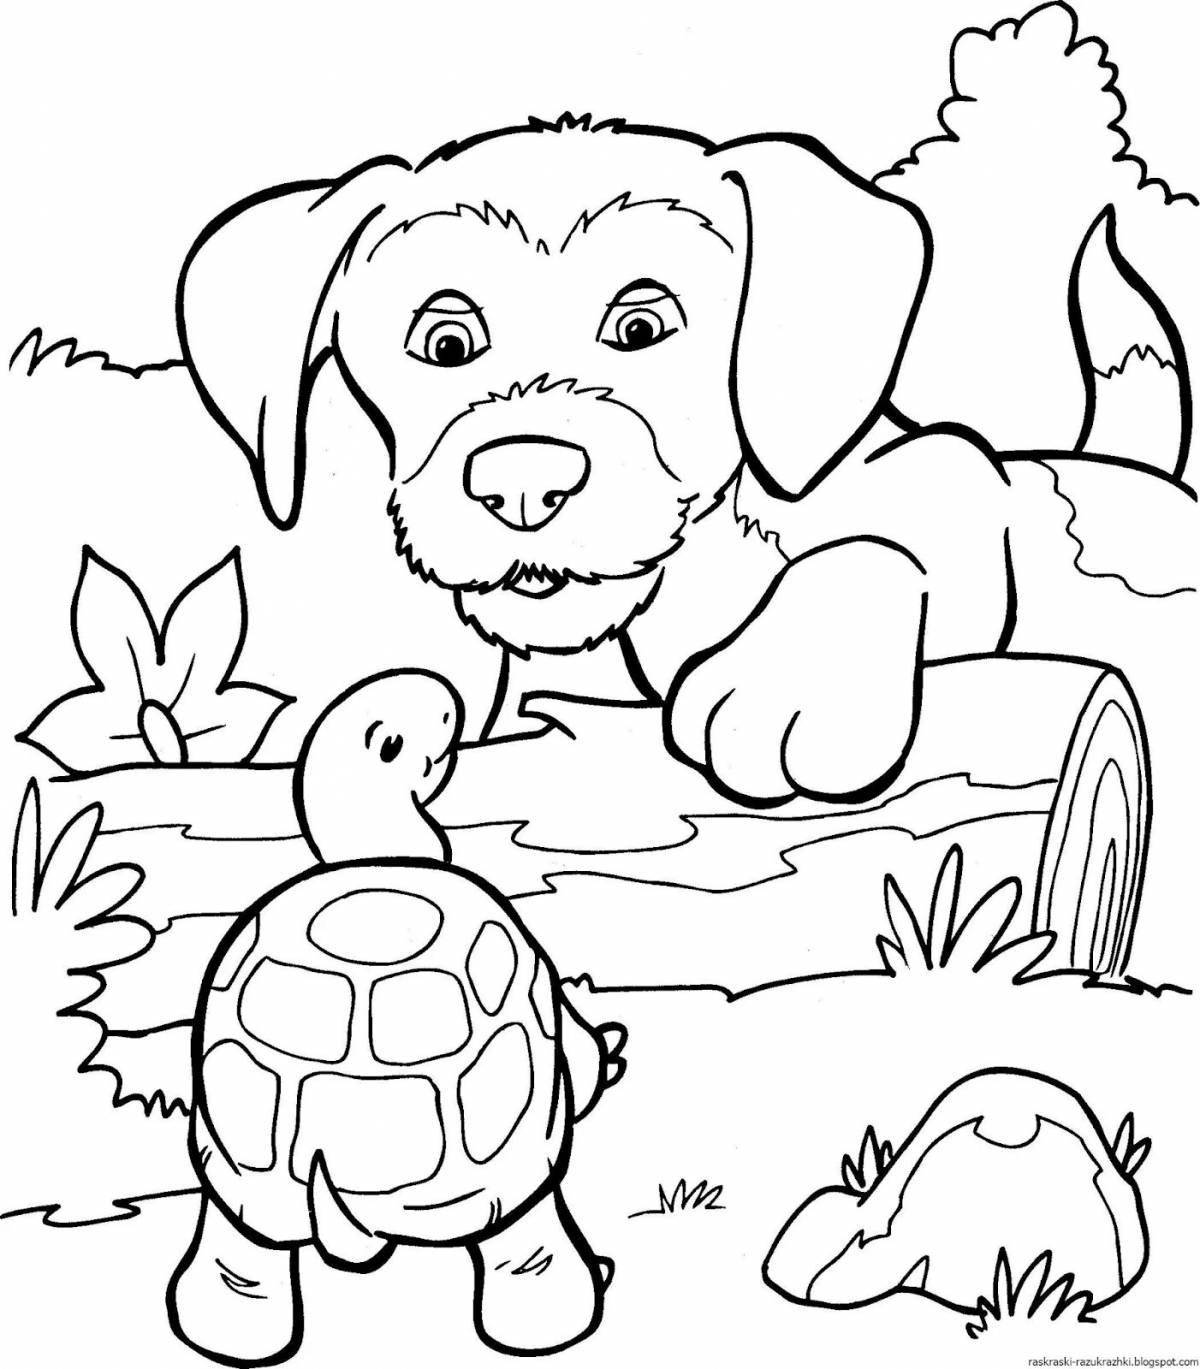 Coloring page inquisitive puppy